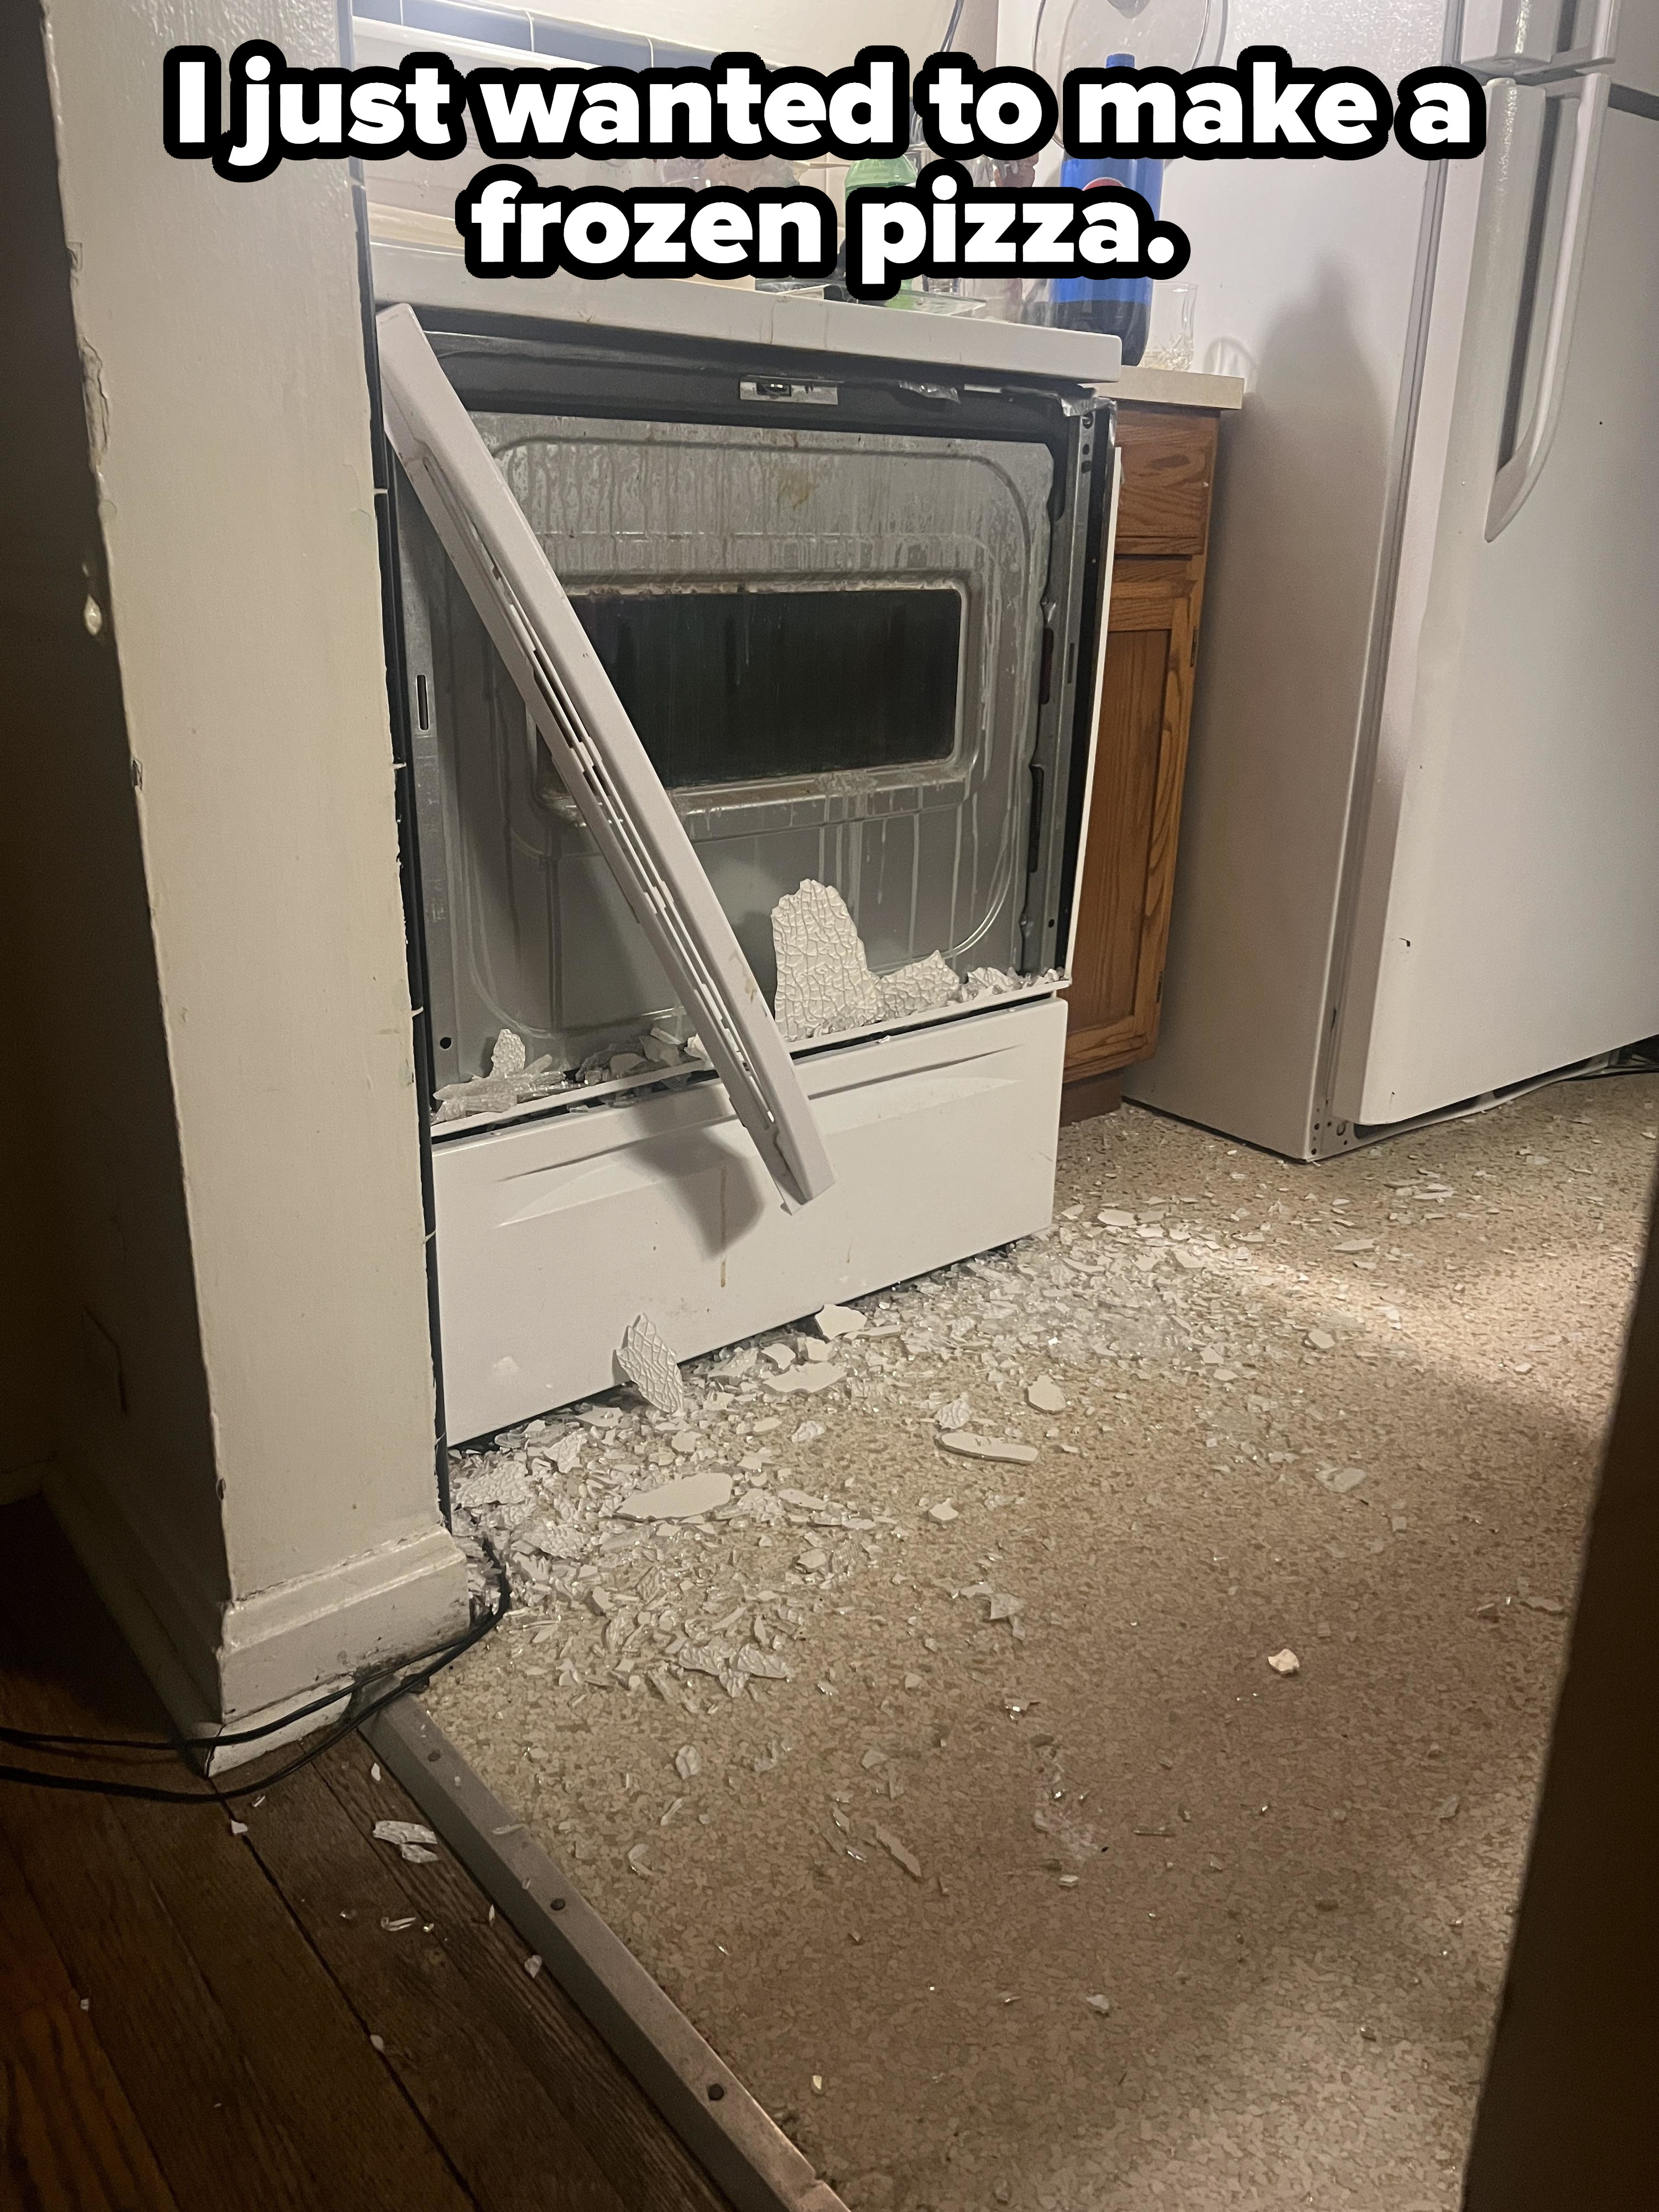 a broken oven and the words &quot;I just wanted to make a frozen pizza&quot;